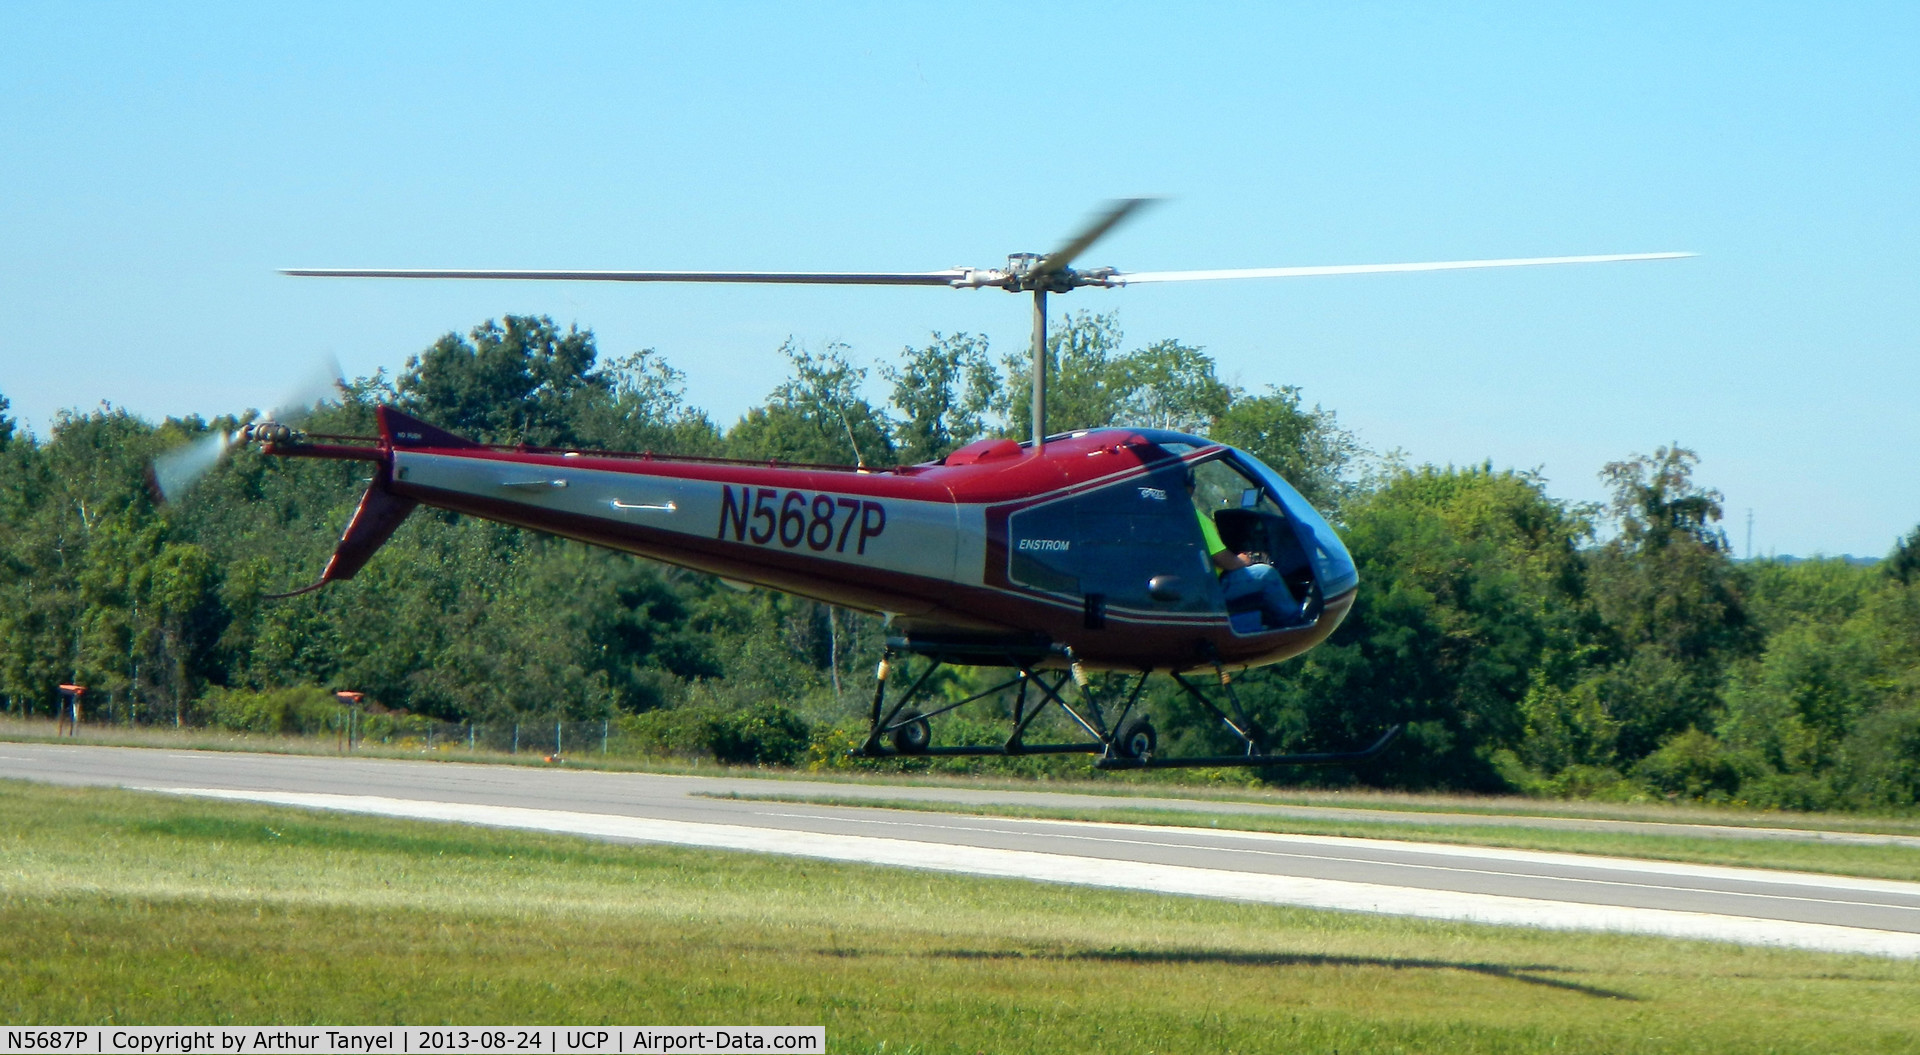 N5687P, Enstrom 280C Shark C/N 1167, Taking off from UCP during the Wheels and Wings Airshow